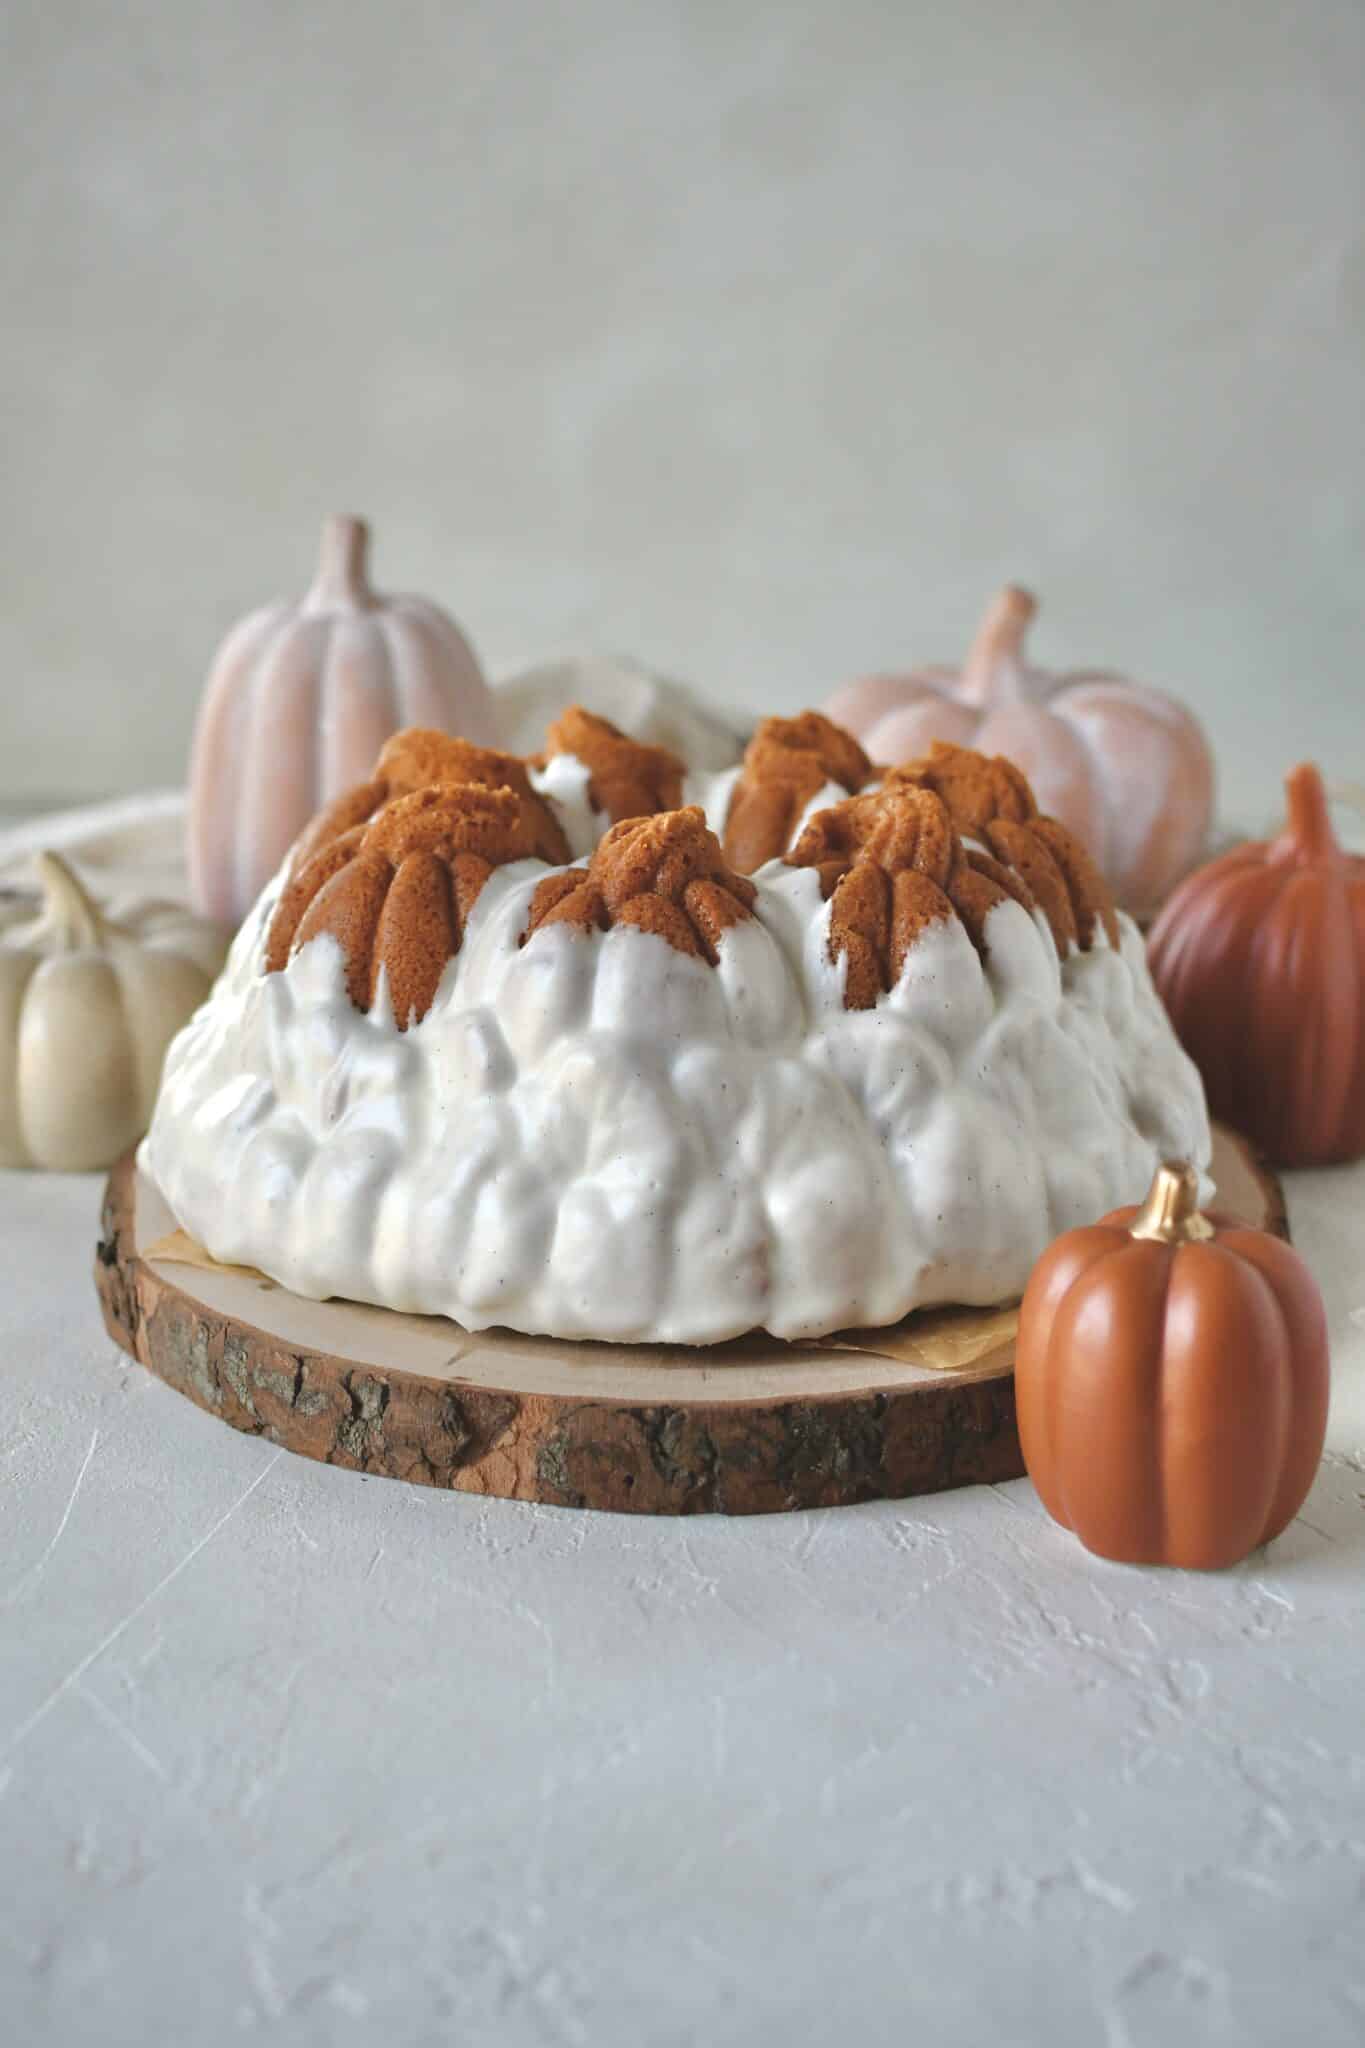 Pumpkin Pound Cake baked and removed from the bundt pan that looks like pumpkins in a field.